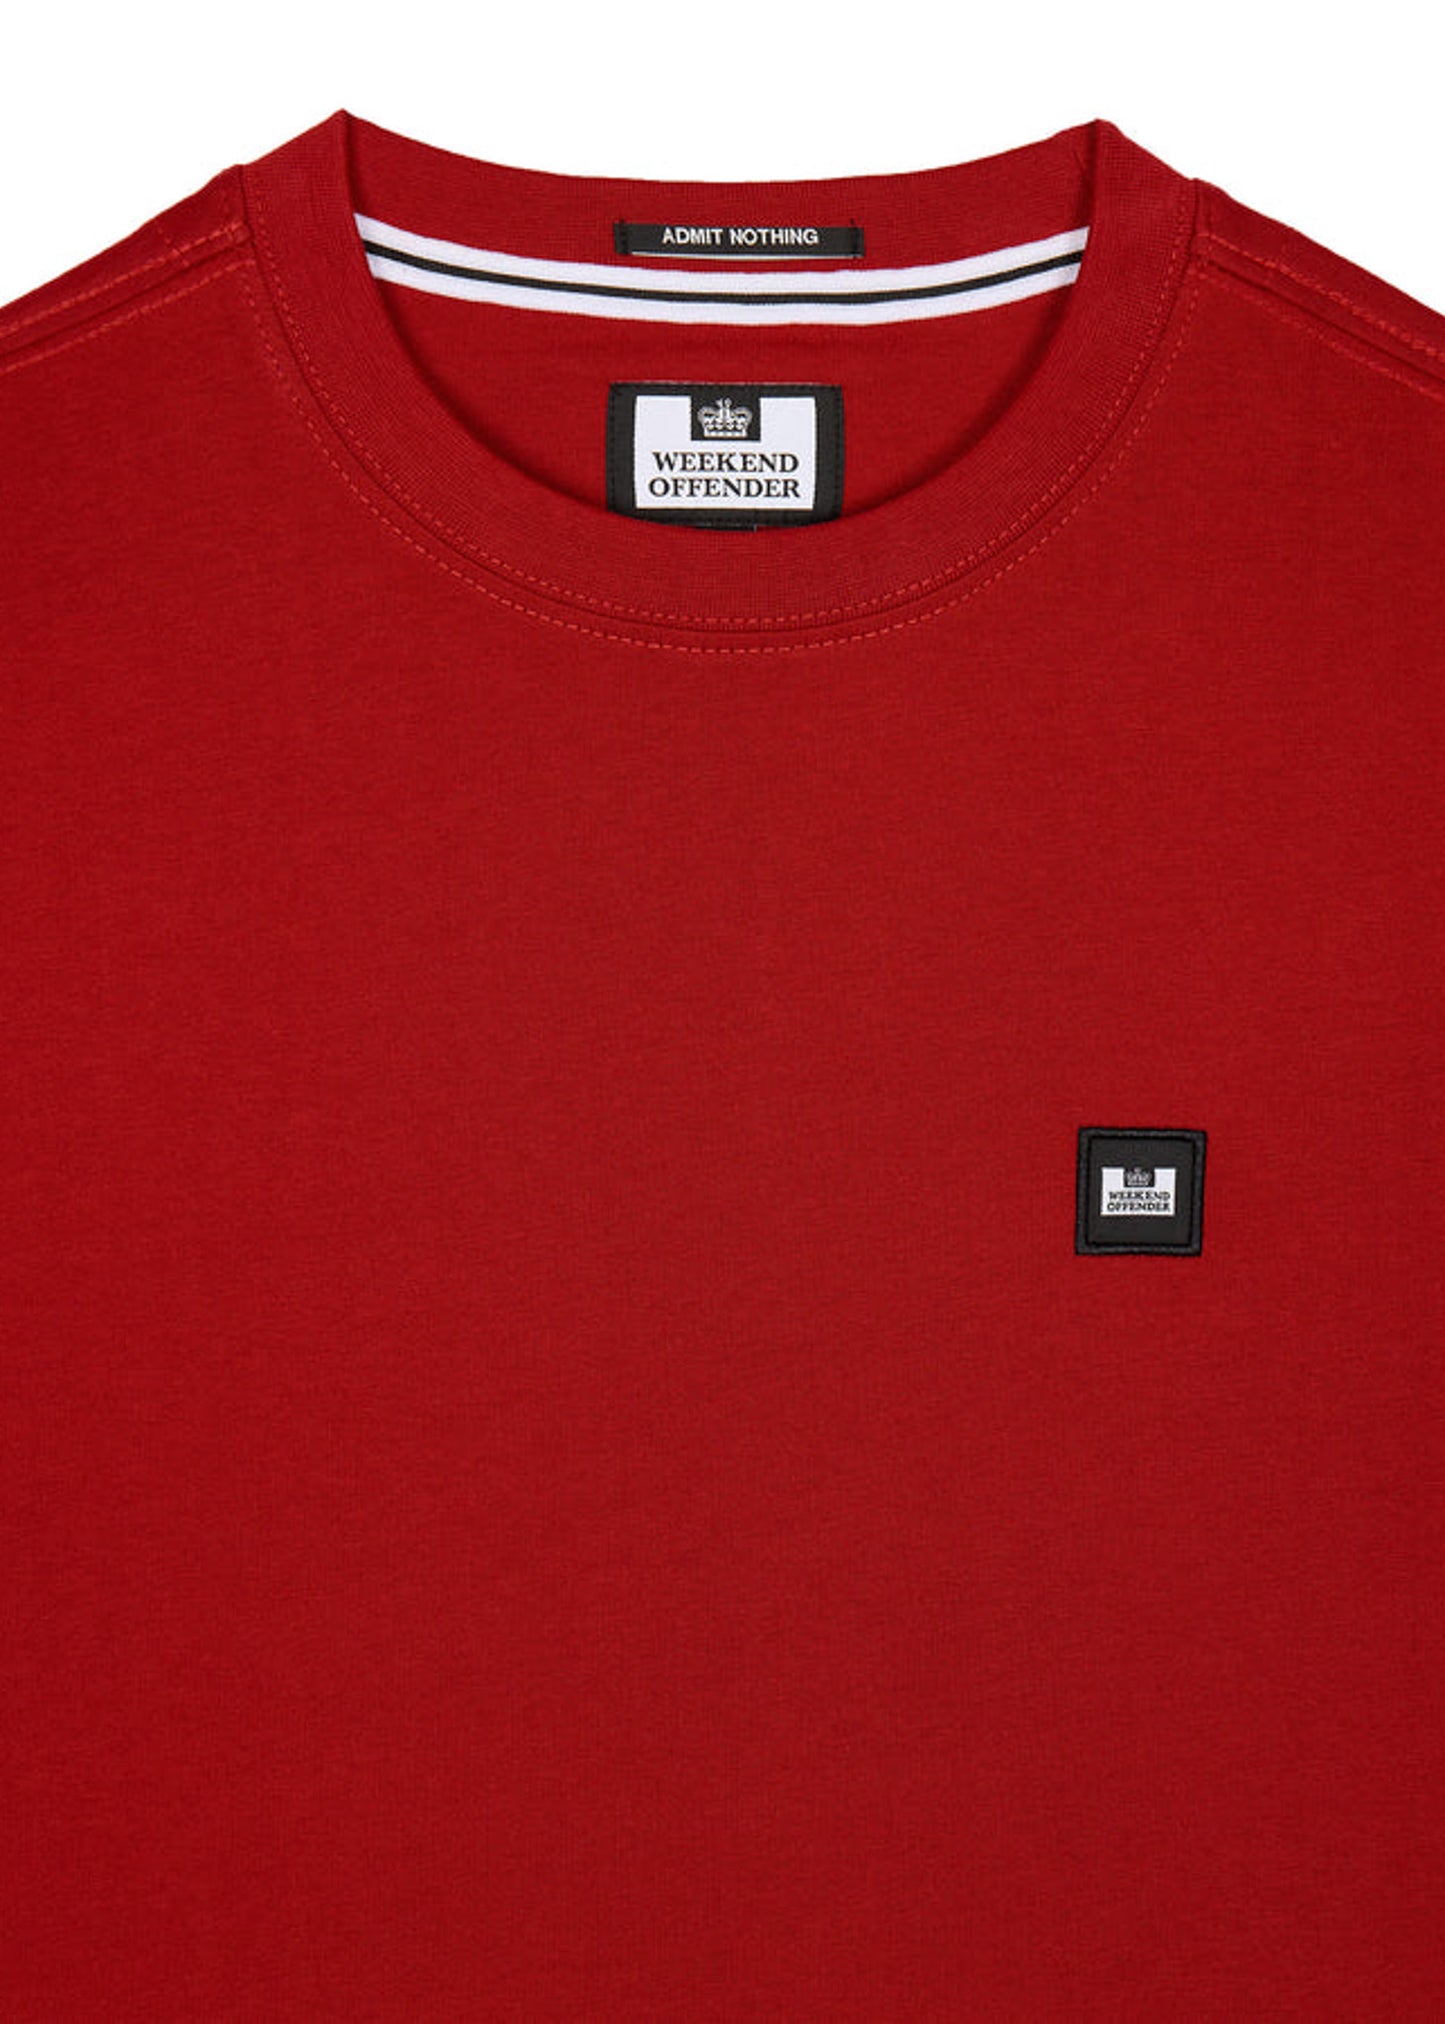 Weekend Offender T-shirts  Cannon beach - scarlet red 